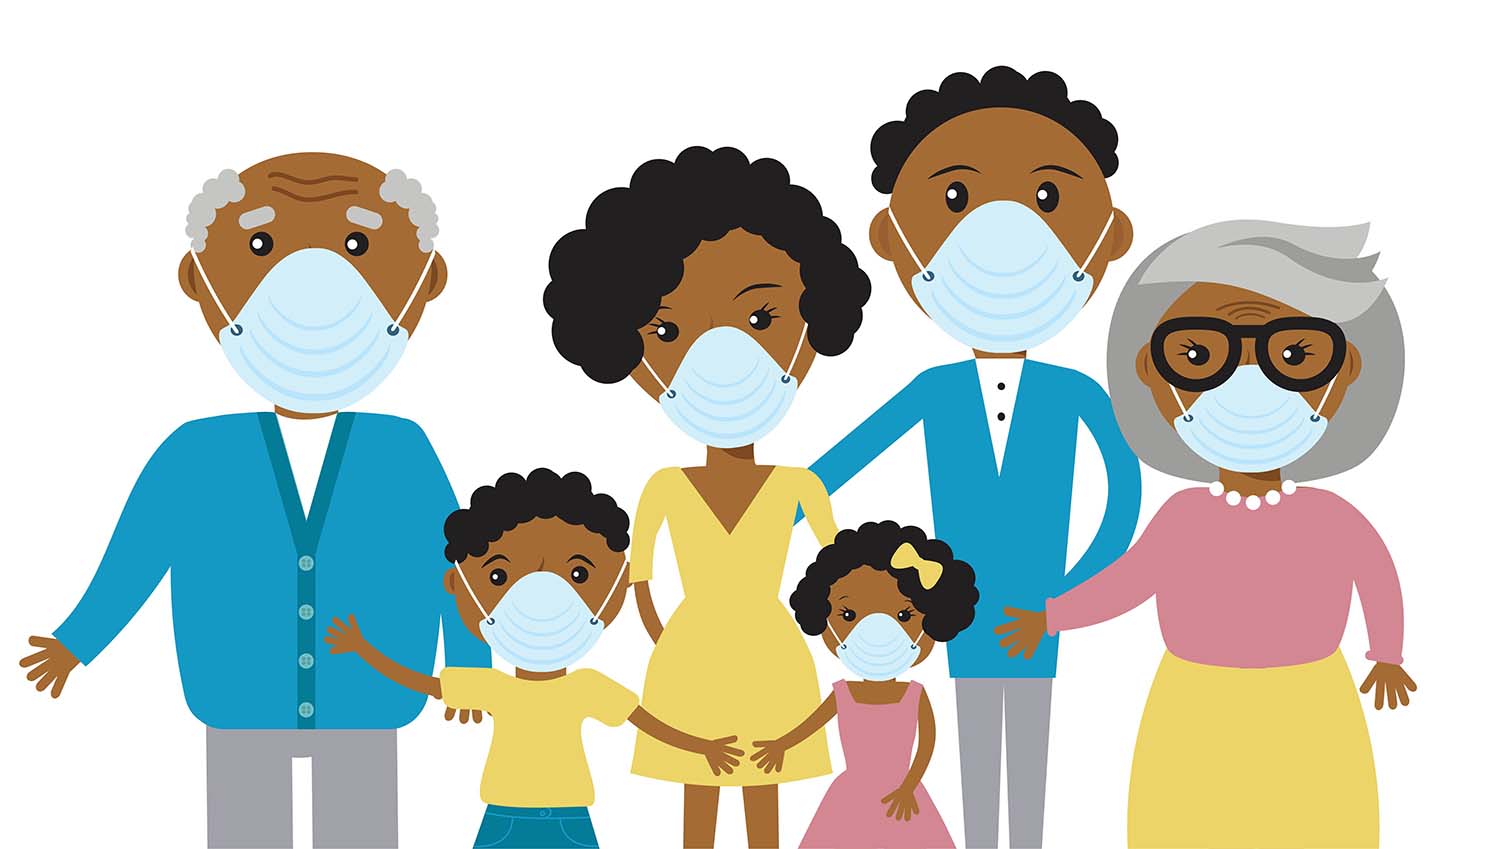 African American family clip art style, wearing facial masks